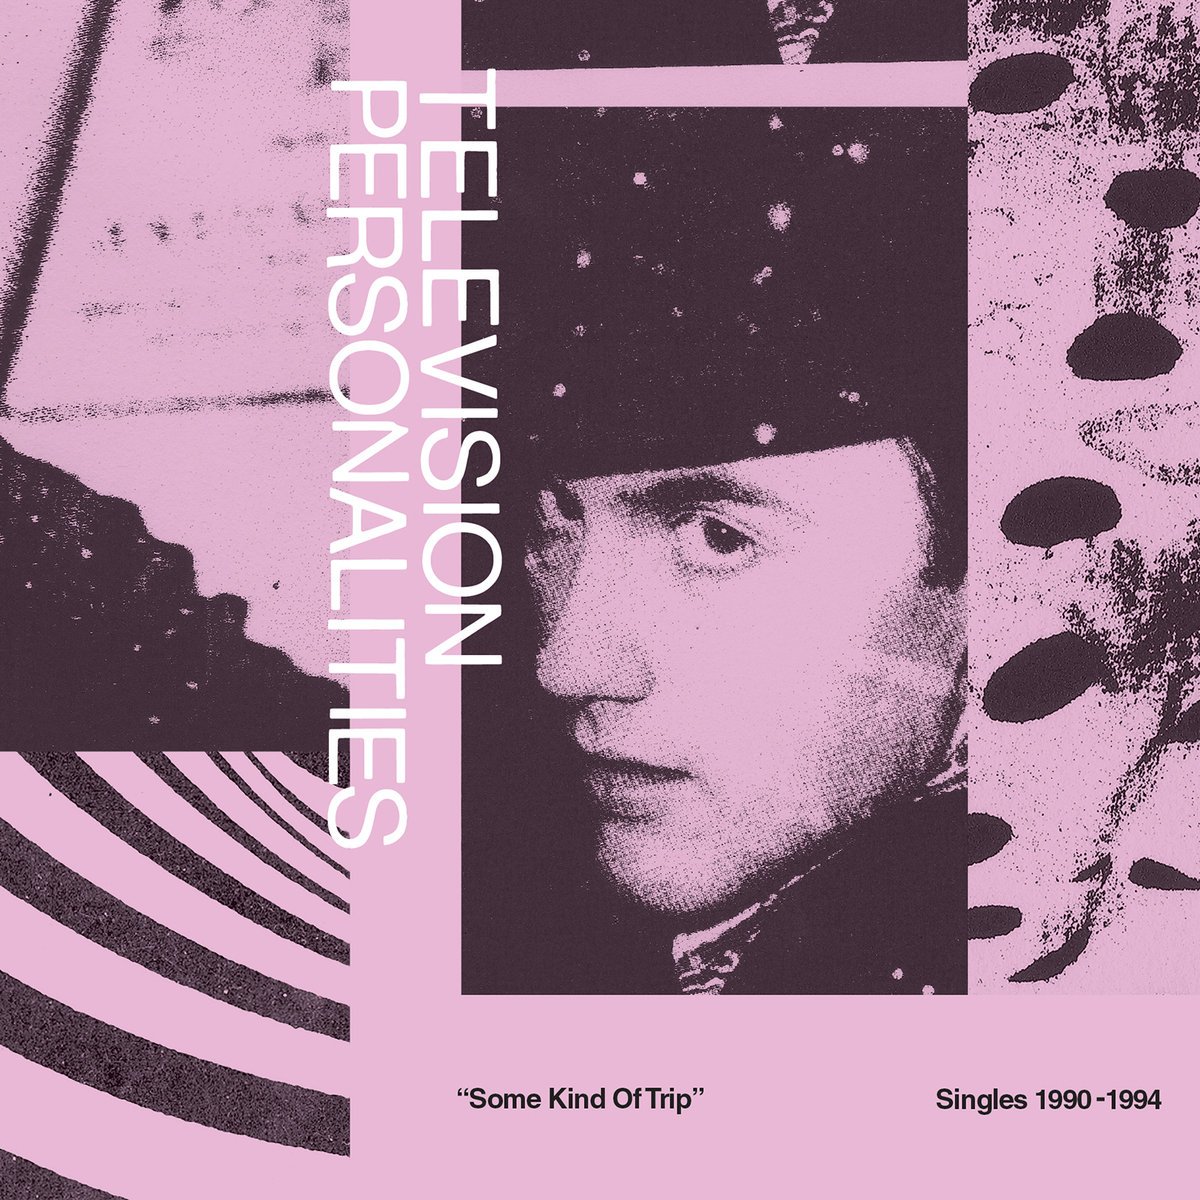 Spinning Television Personalities' Some Kind Of Trip (Singles 1990-1994) @firerecordings #DanielTreacy